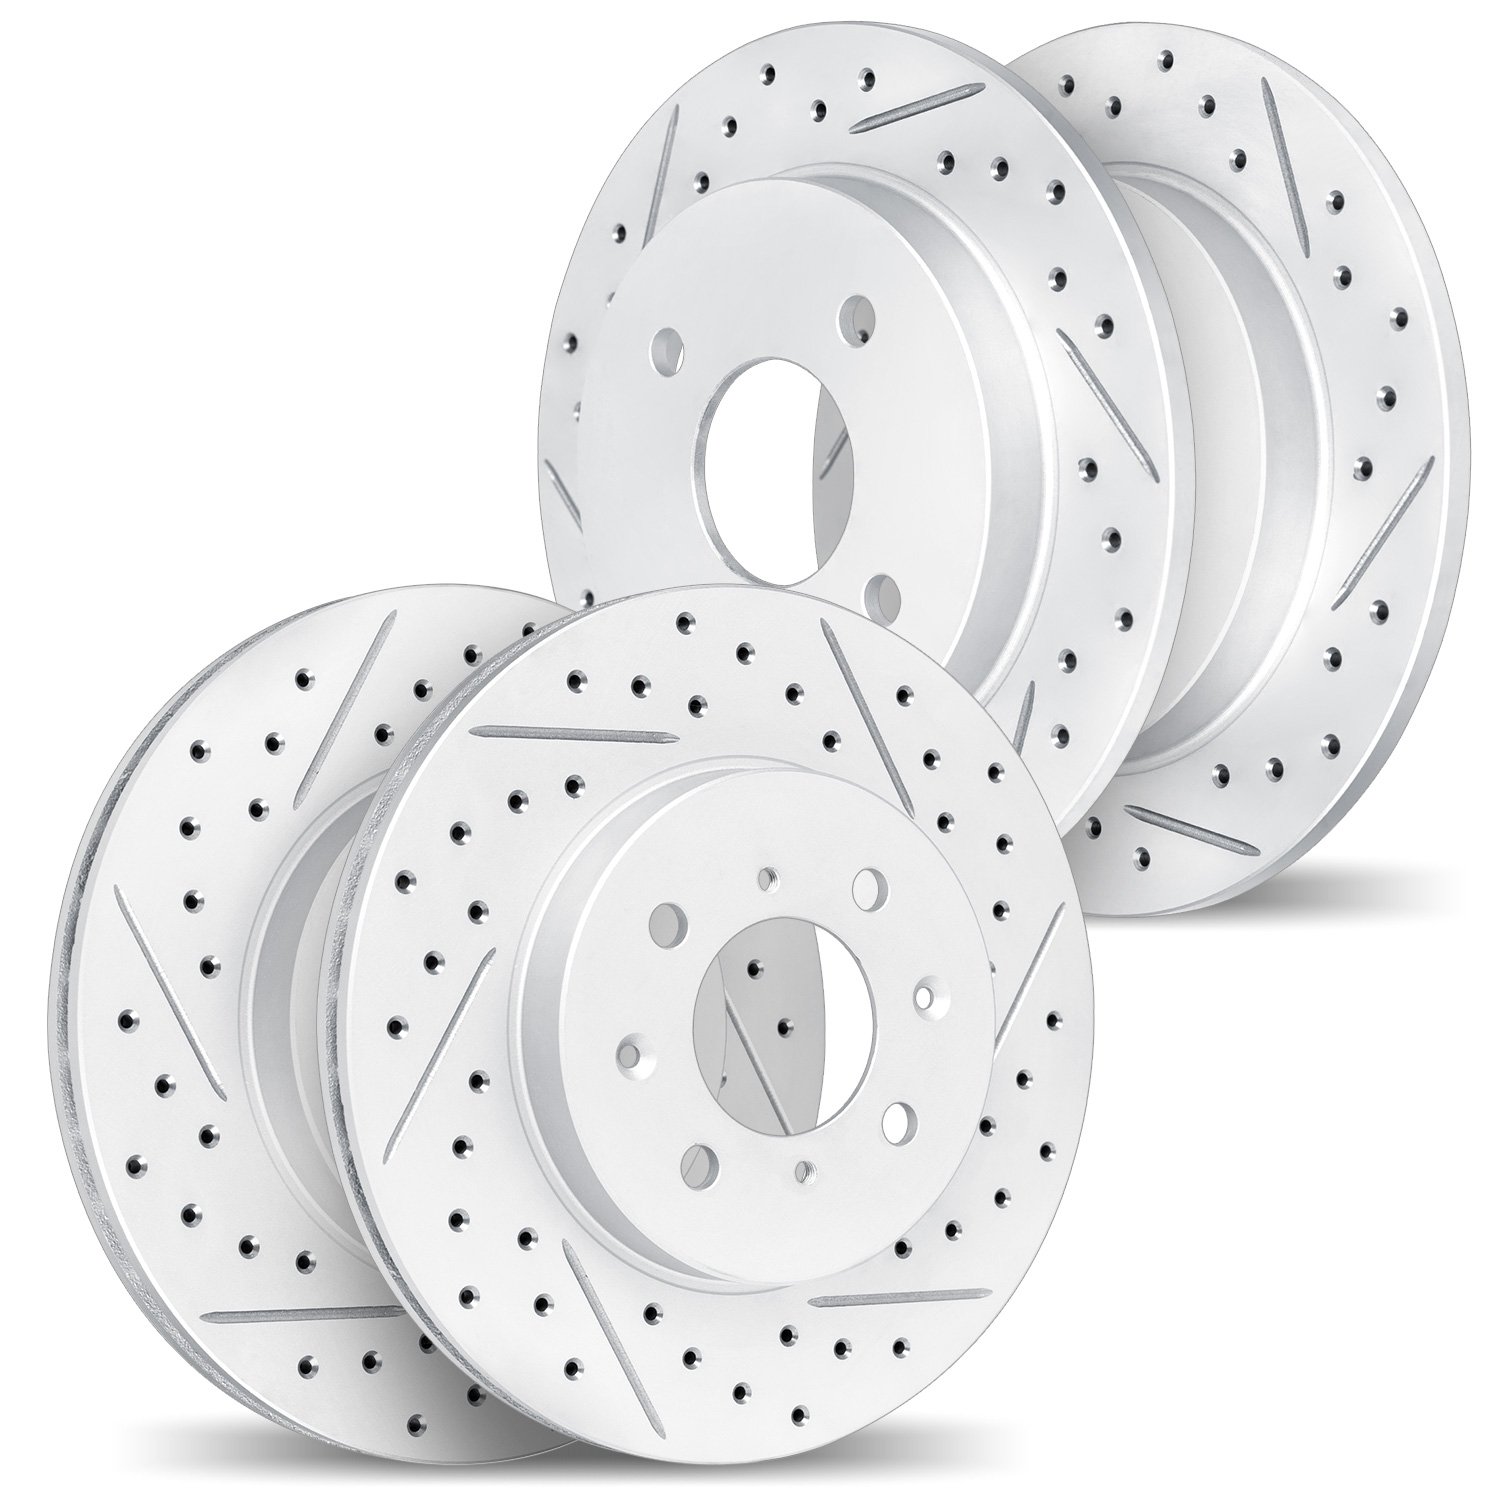 2004-67062 Geoperformance Drilled/Slotted Brake Rotors, 2004-2006 Infiniti/Nissan, Position: Front and Rear